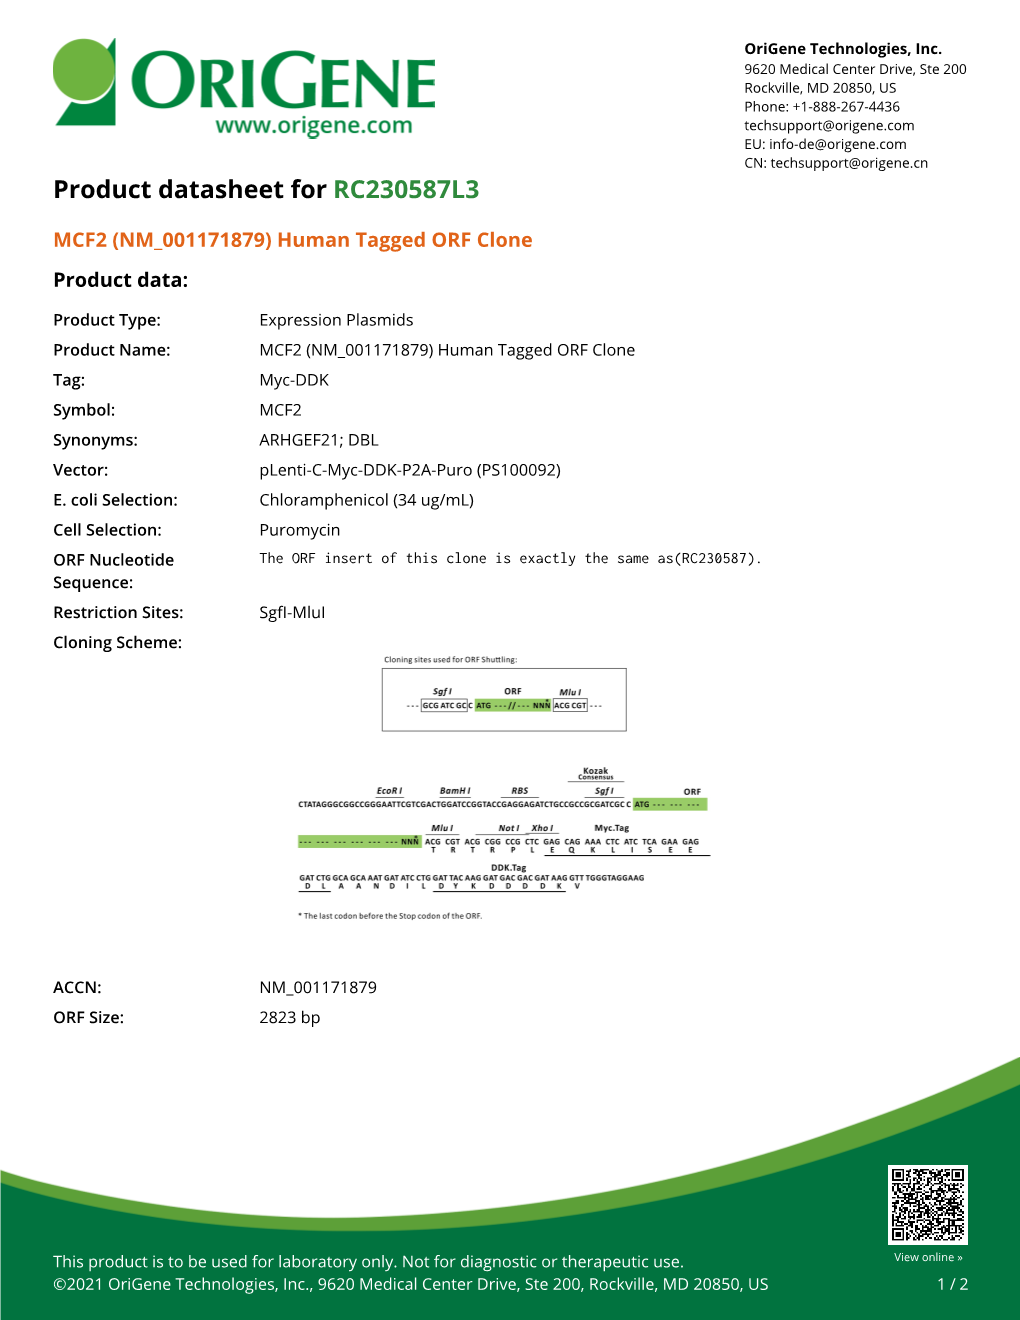 MCF2 (NM 001171879) Human Tagged ORF Clone Product Data